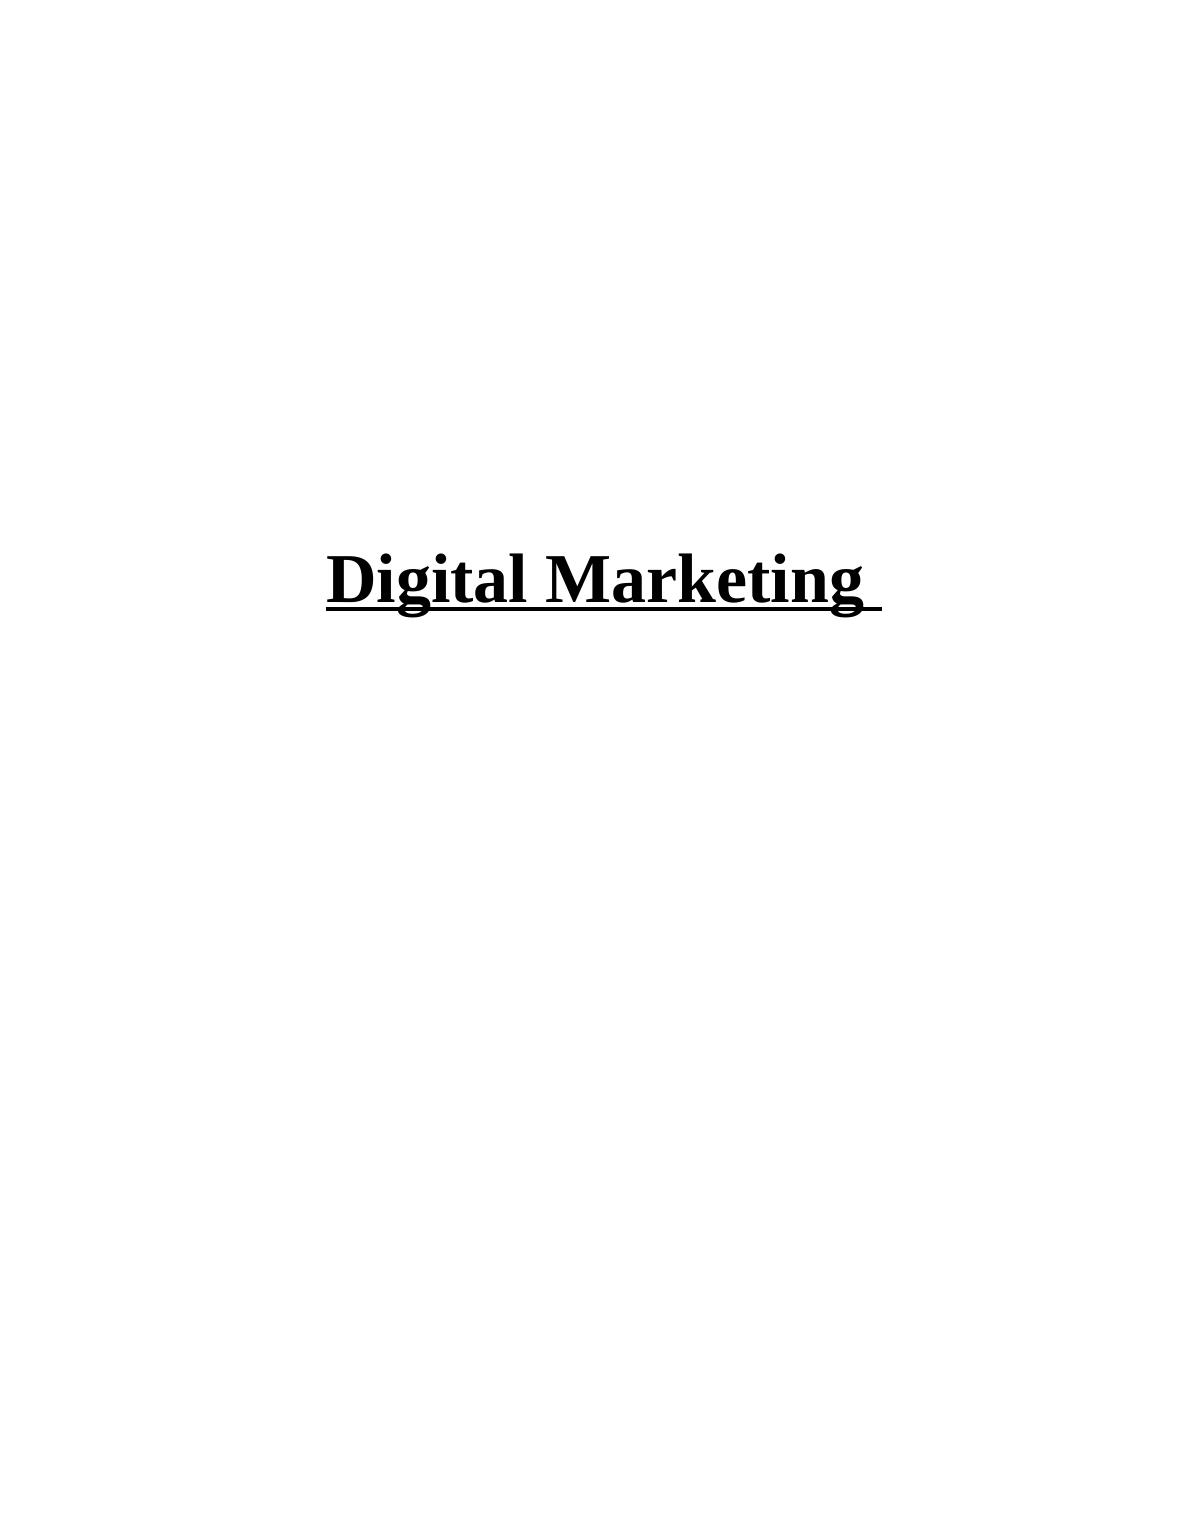 Difference between traditional and digital marketing_1